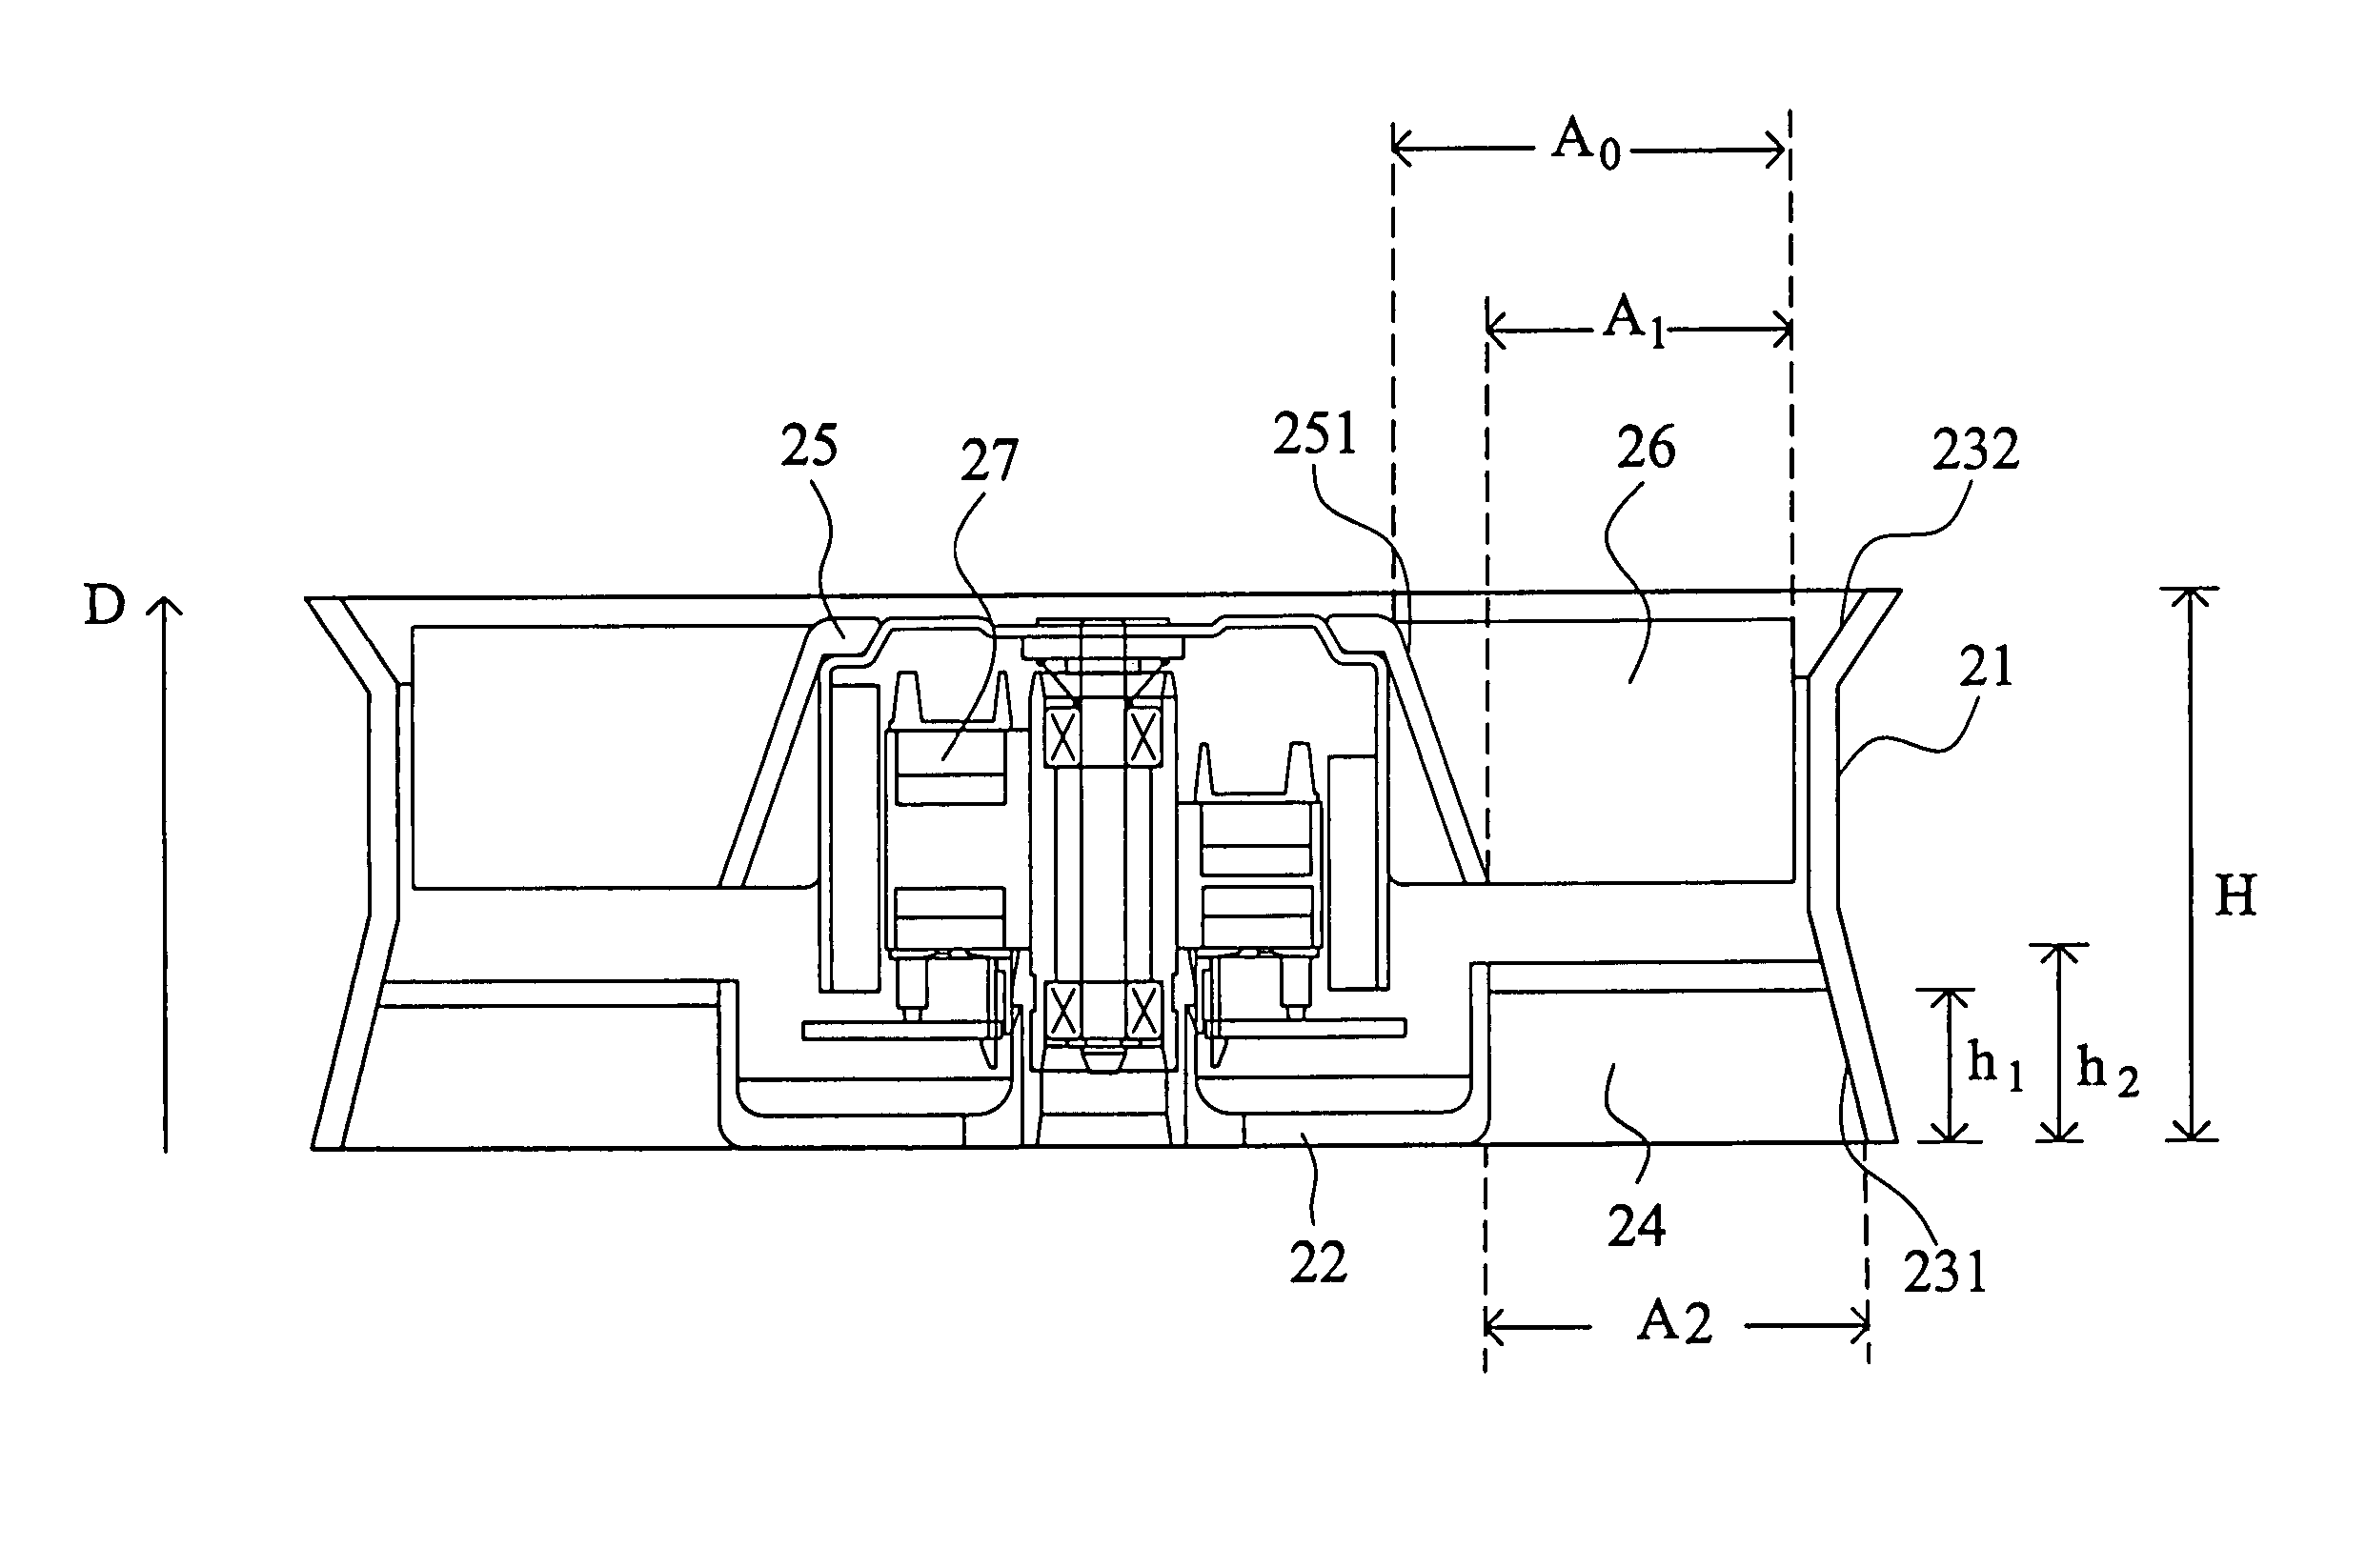 Heat-dissipating device and housing thereof